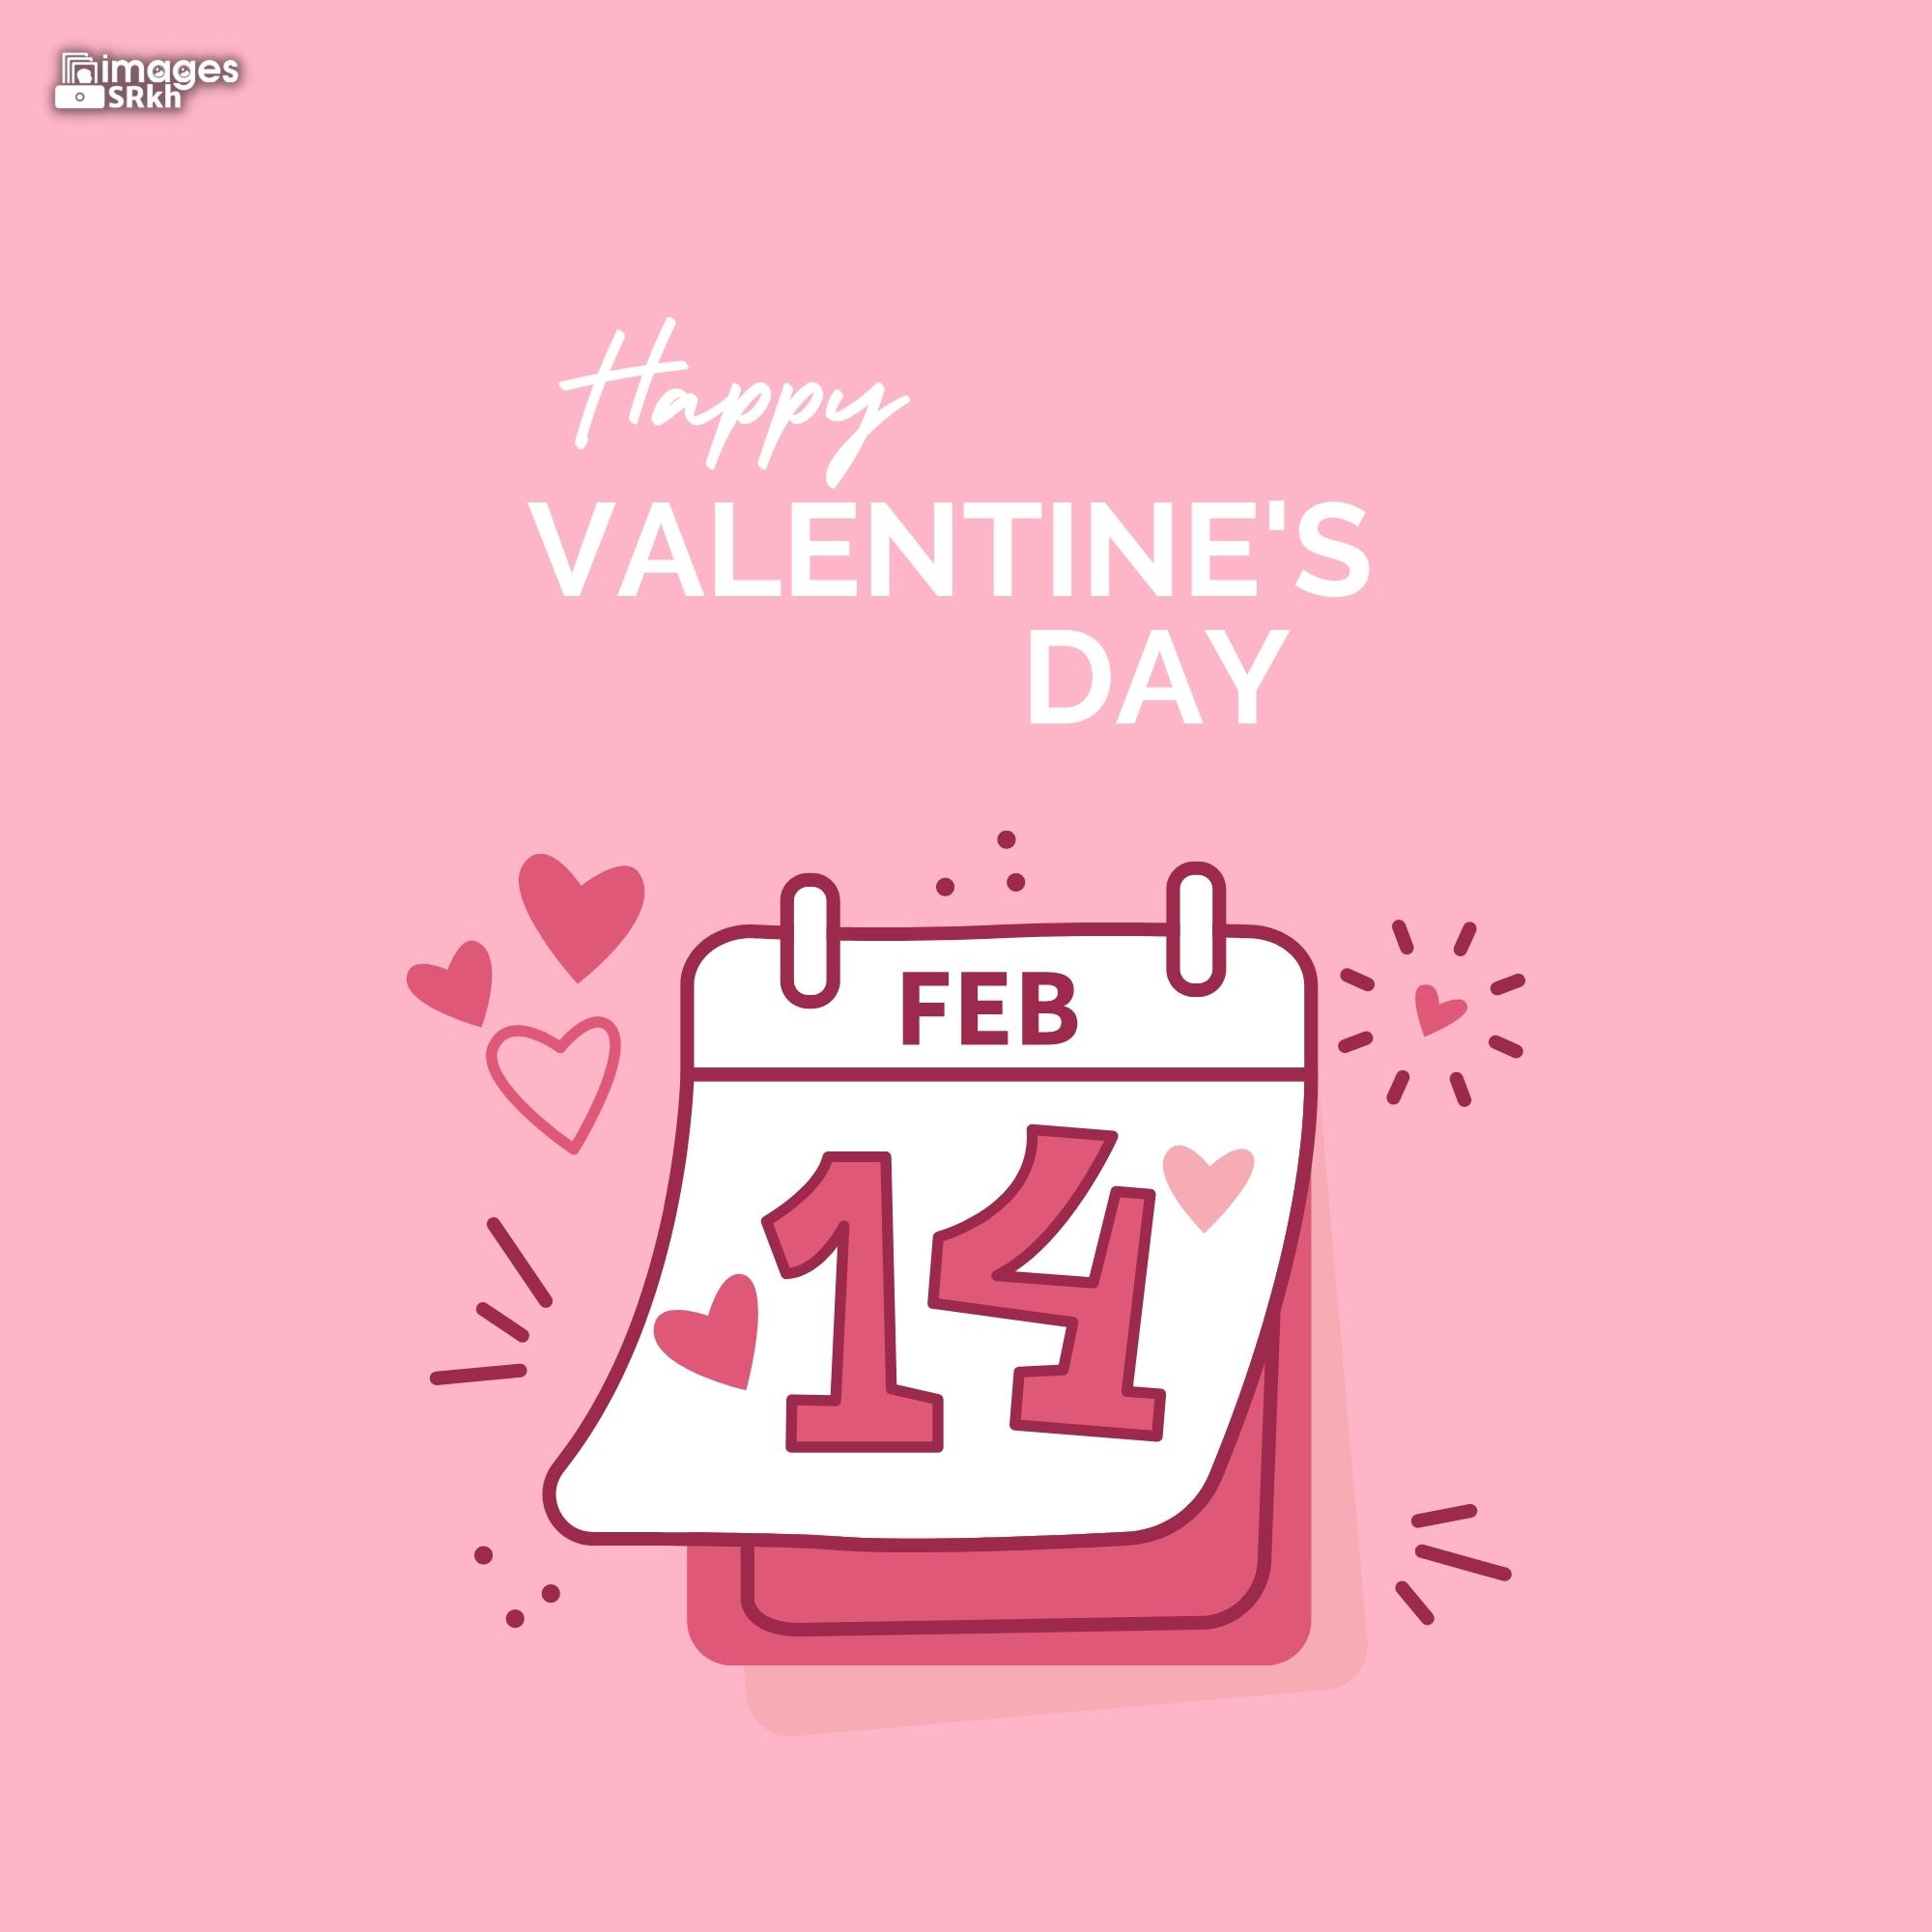 Happy Valentines Day | 494 | PREMIUM IMAGES | Wishes for Love